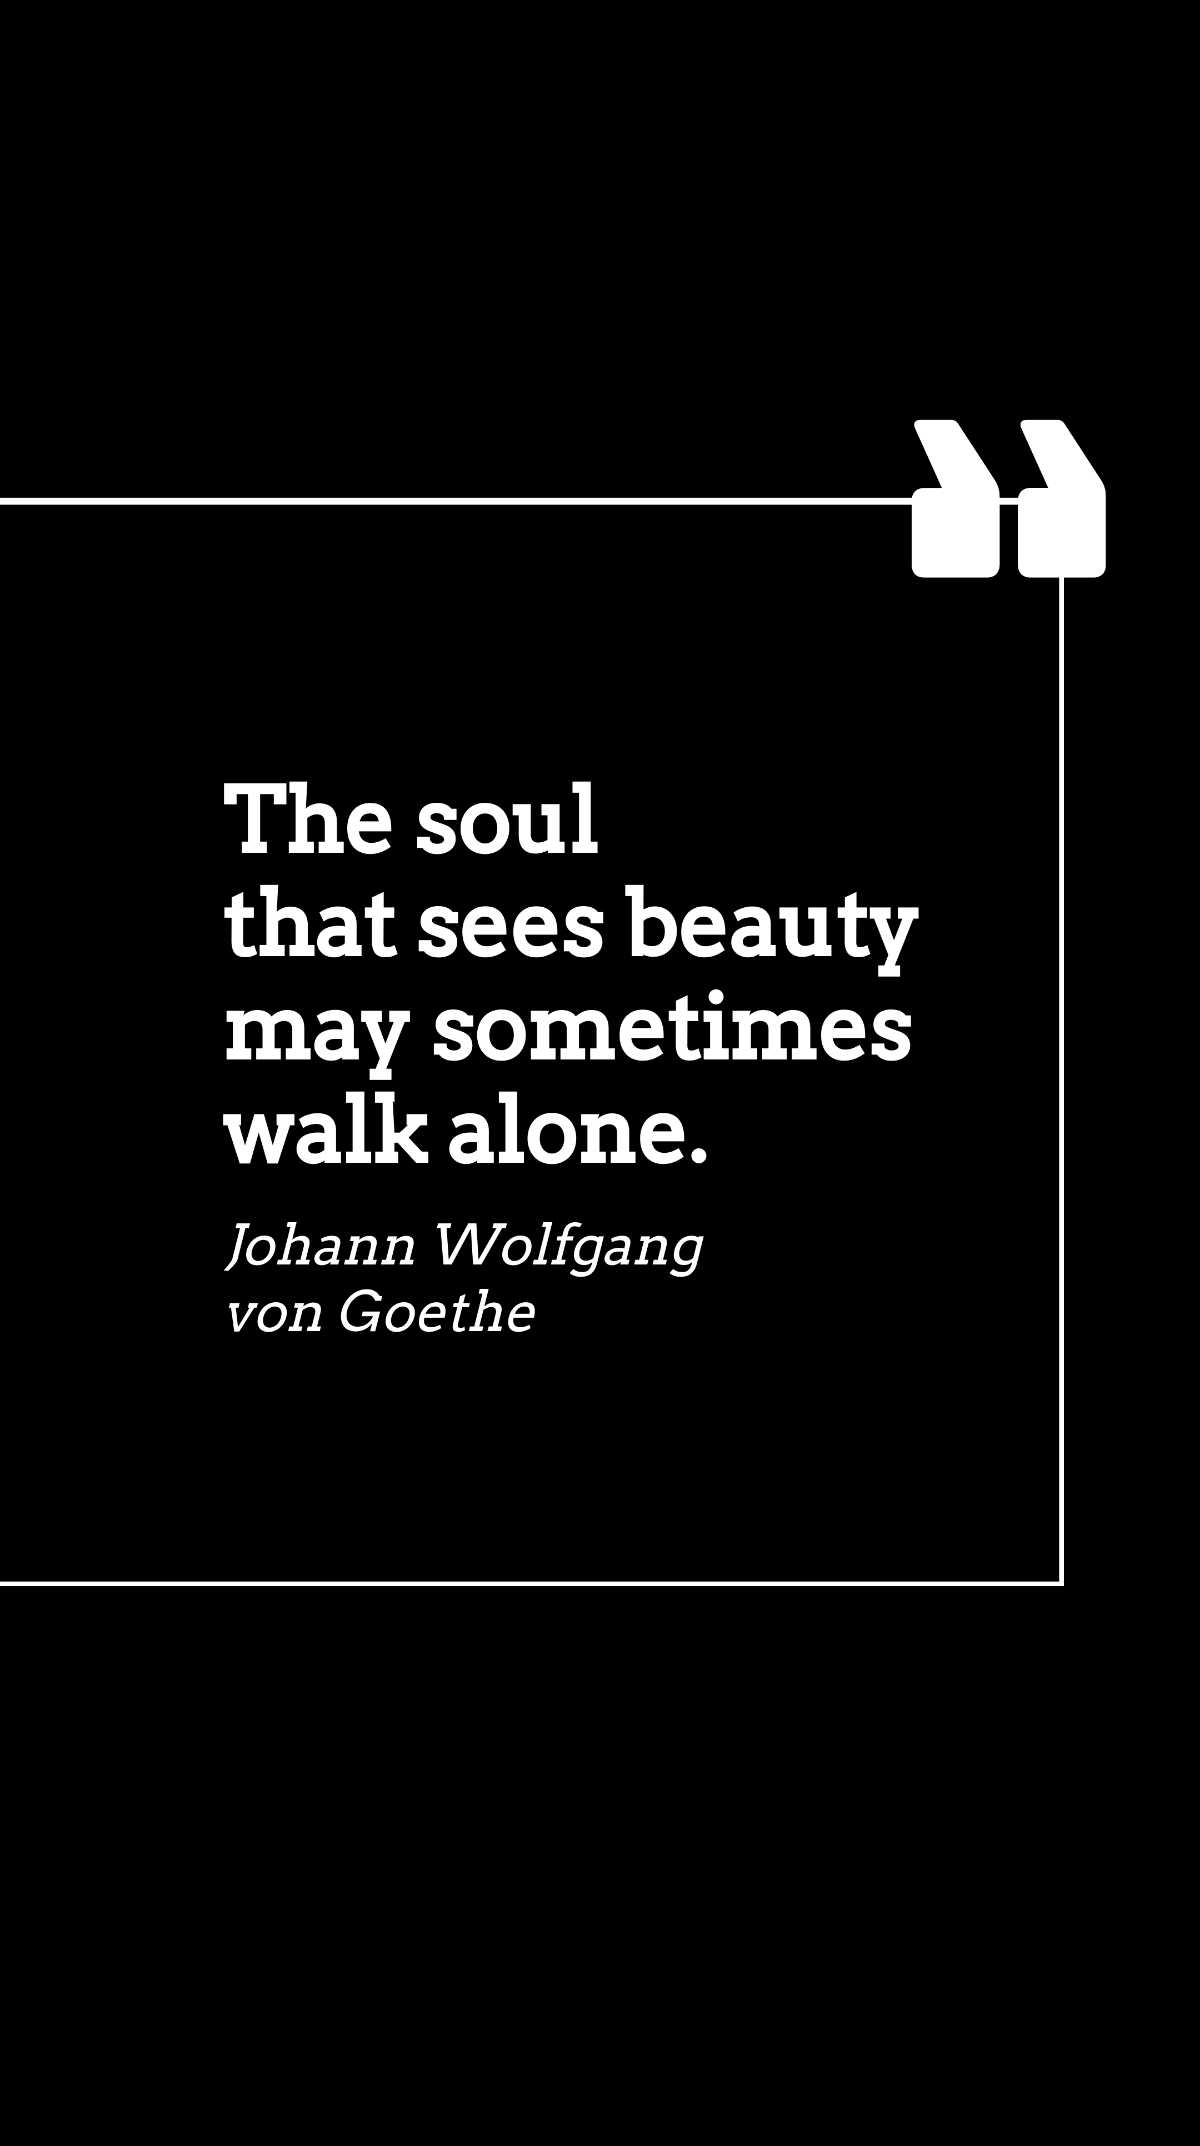 Johann Wolfgang von Goethe - The soul that sees beauty may sometimes walk alone. Template